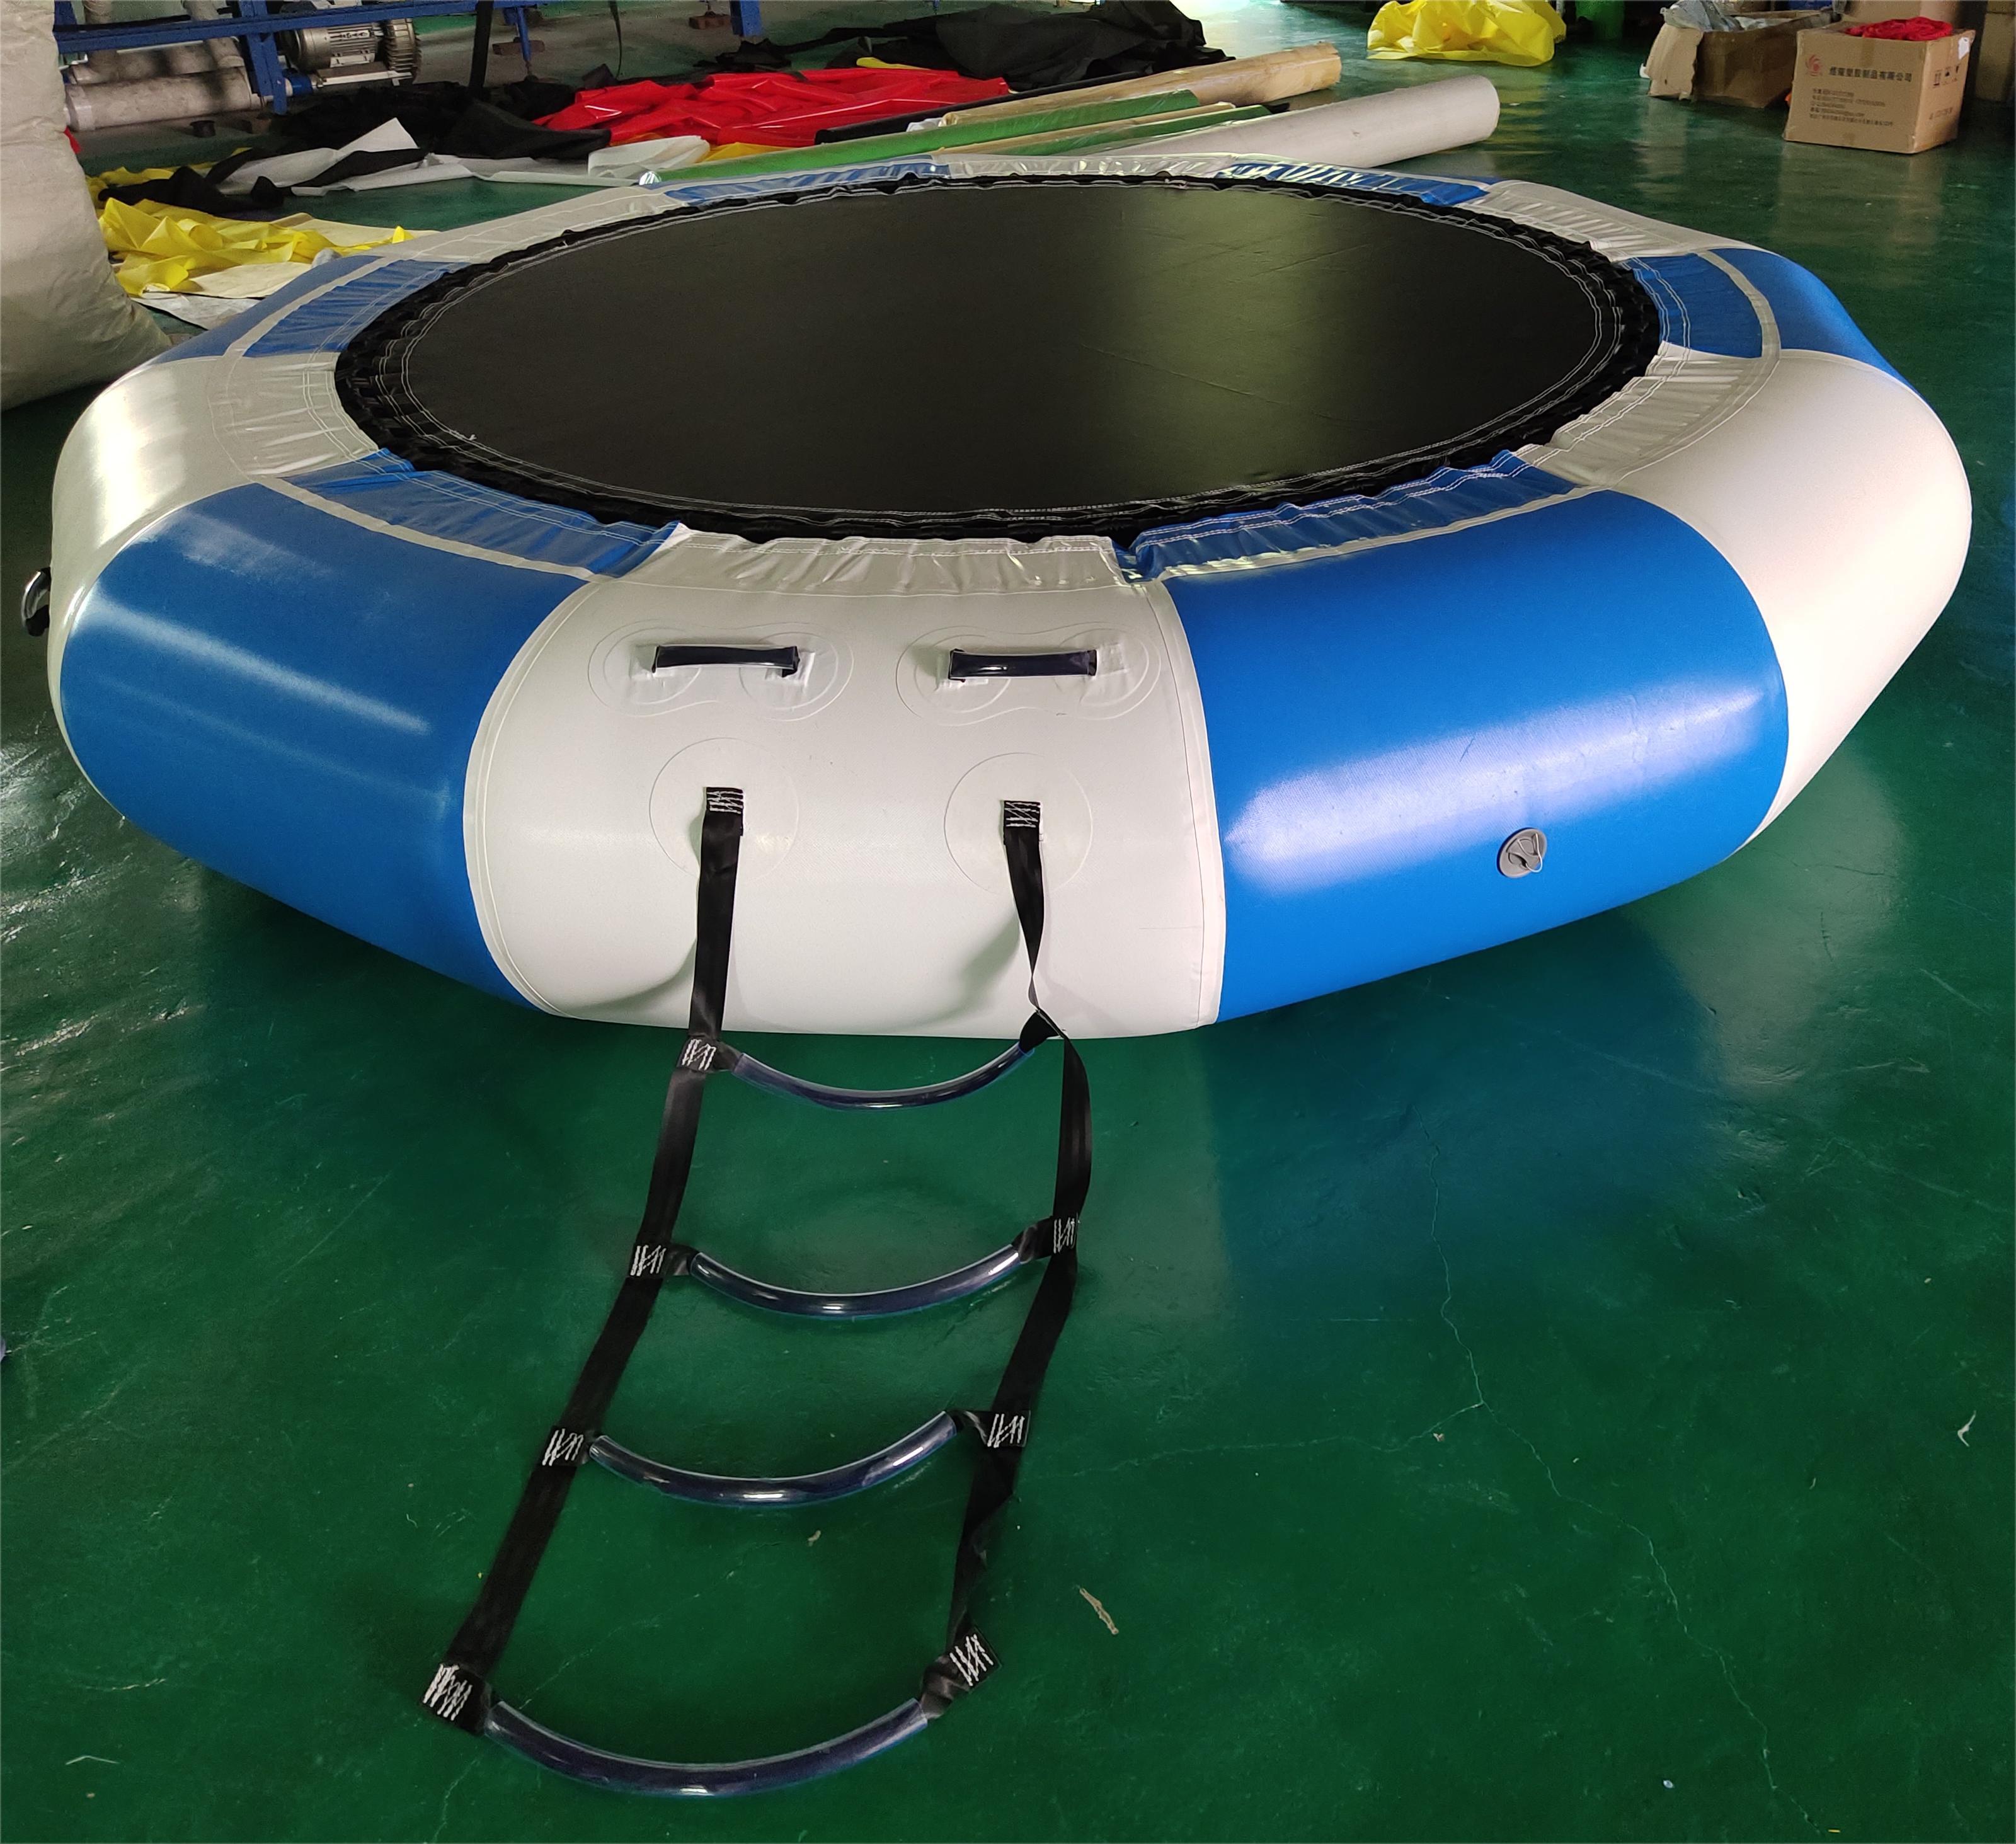 inflatable Jumping bungee Inflatable Water Park Equipment Floating Trampoline Jumping pad Outdoor inflatable Jumping bungee Single person trampoline bungee for sale Customized PVC Water Trampoline Inflatable  inflatable Jumping bungee,PVC Water Trampoline